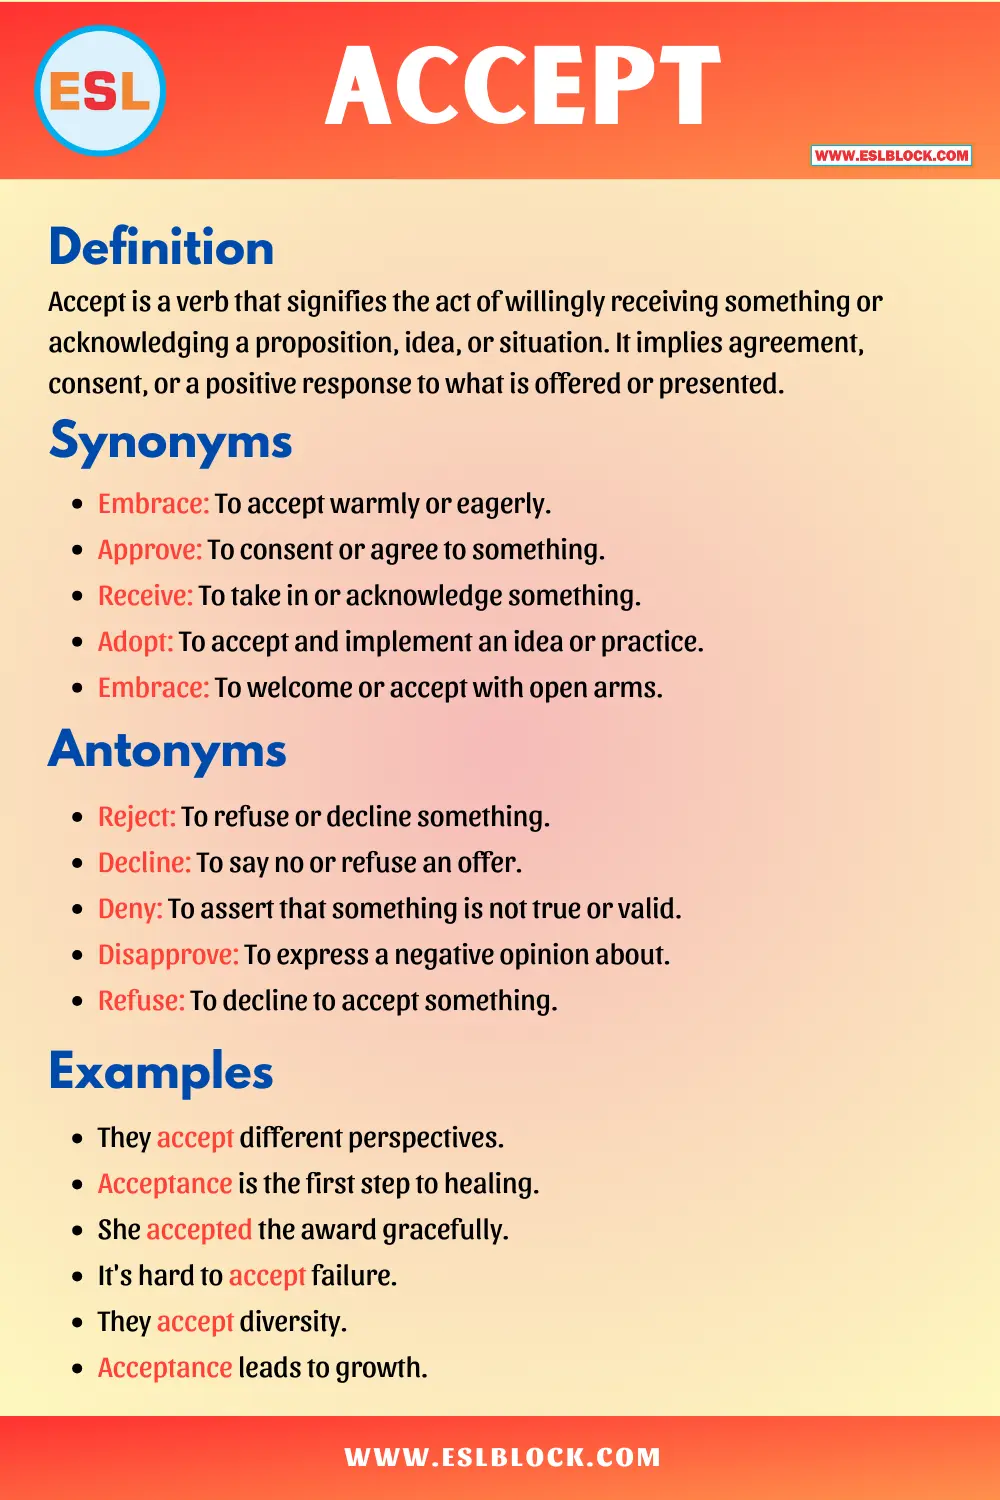 Accept Synonyms, Antonyms, Meaning, Definition